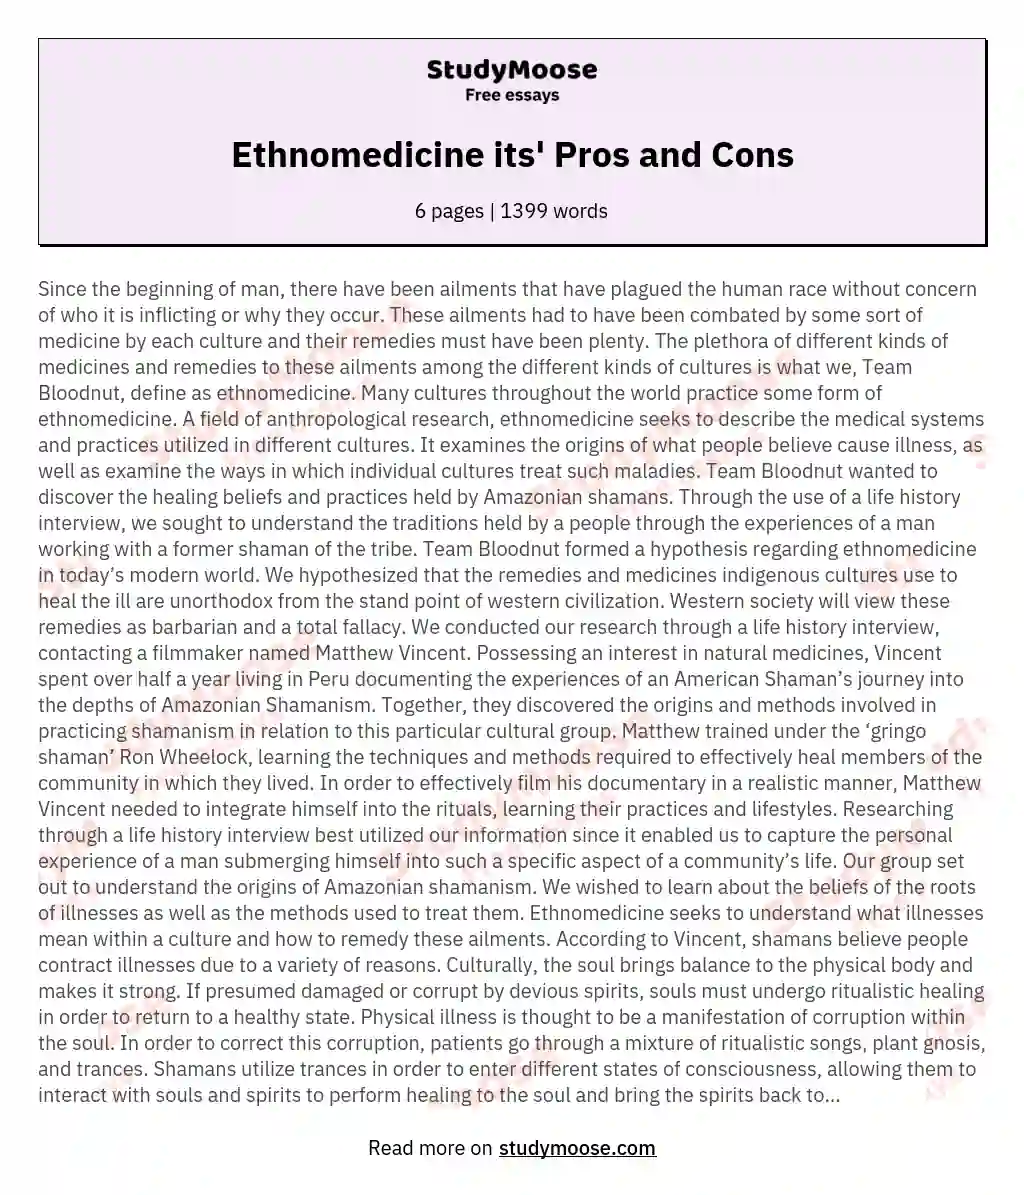 Ethnomedicine its' Pros and Cons essay